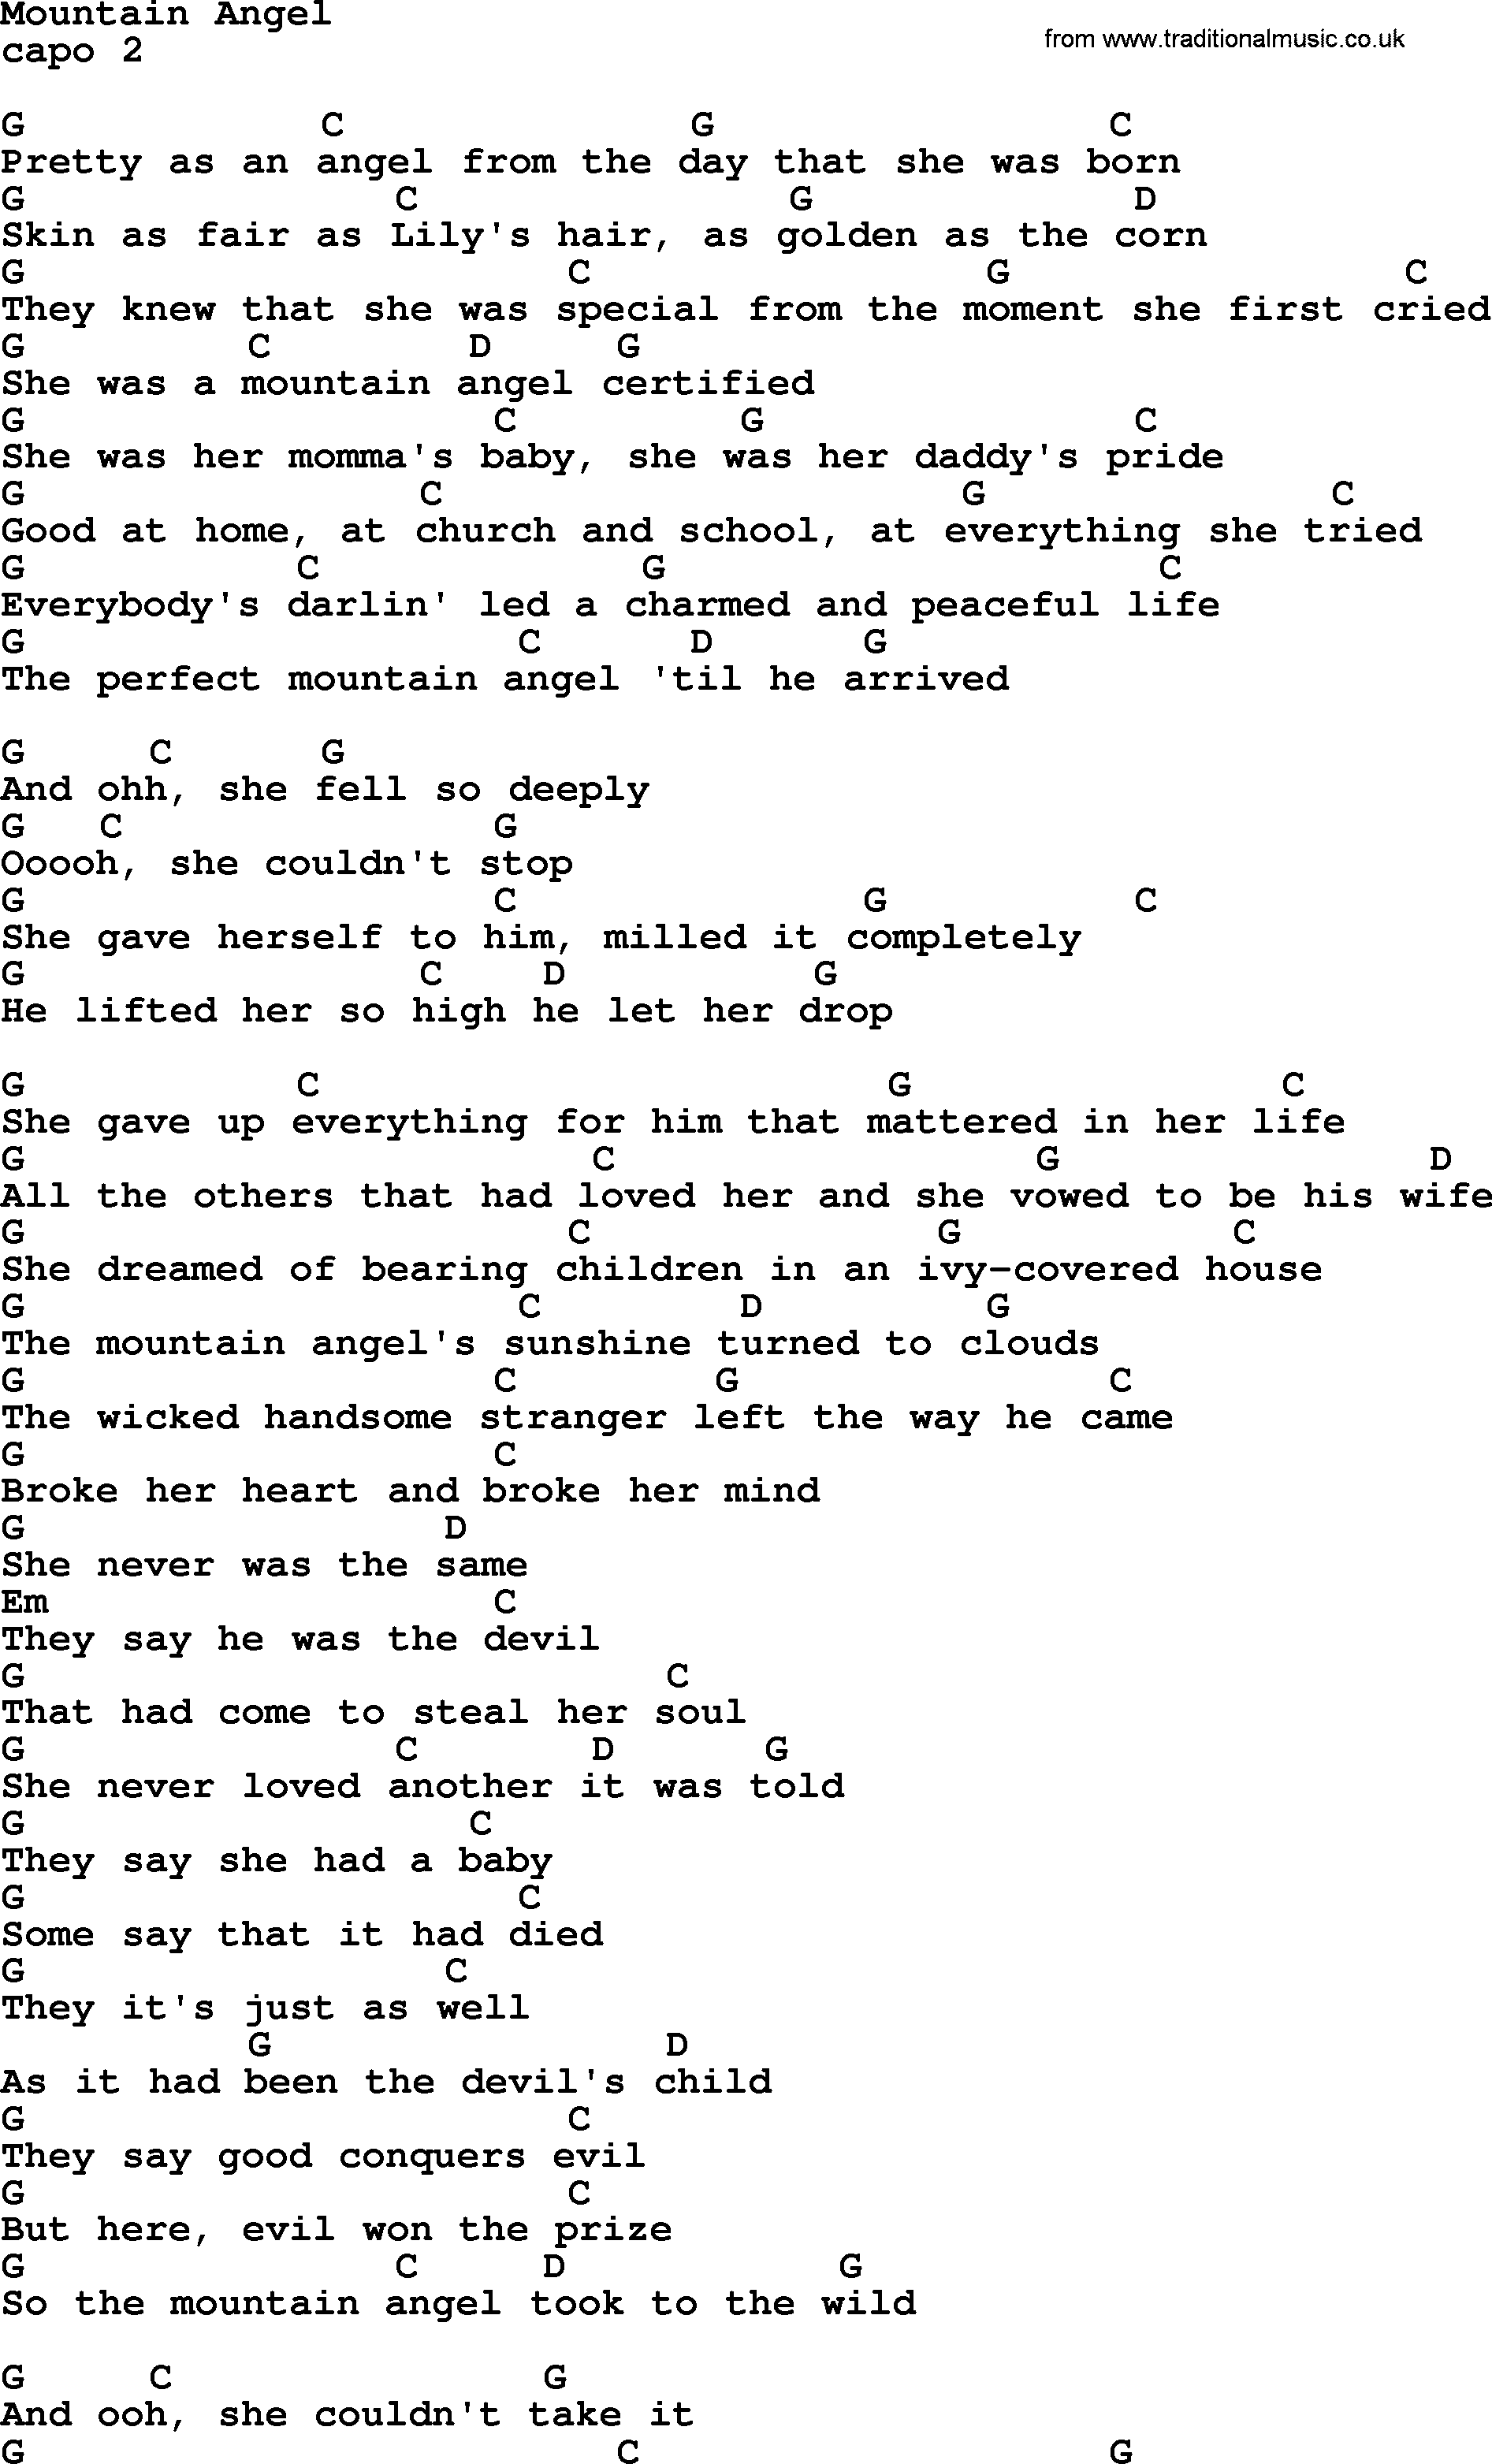 Dolly Parton song Mountain Angel, lyrics and chords